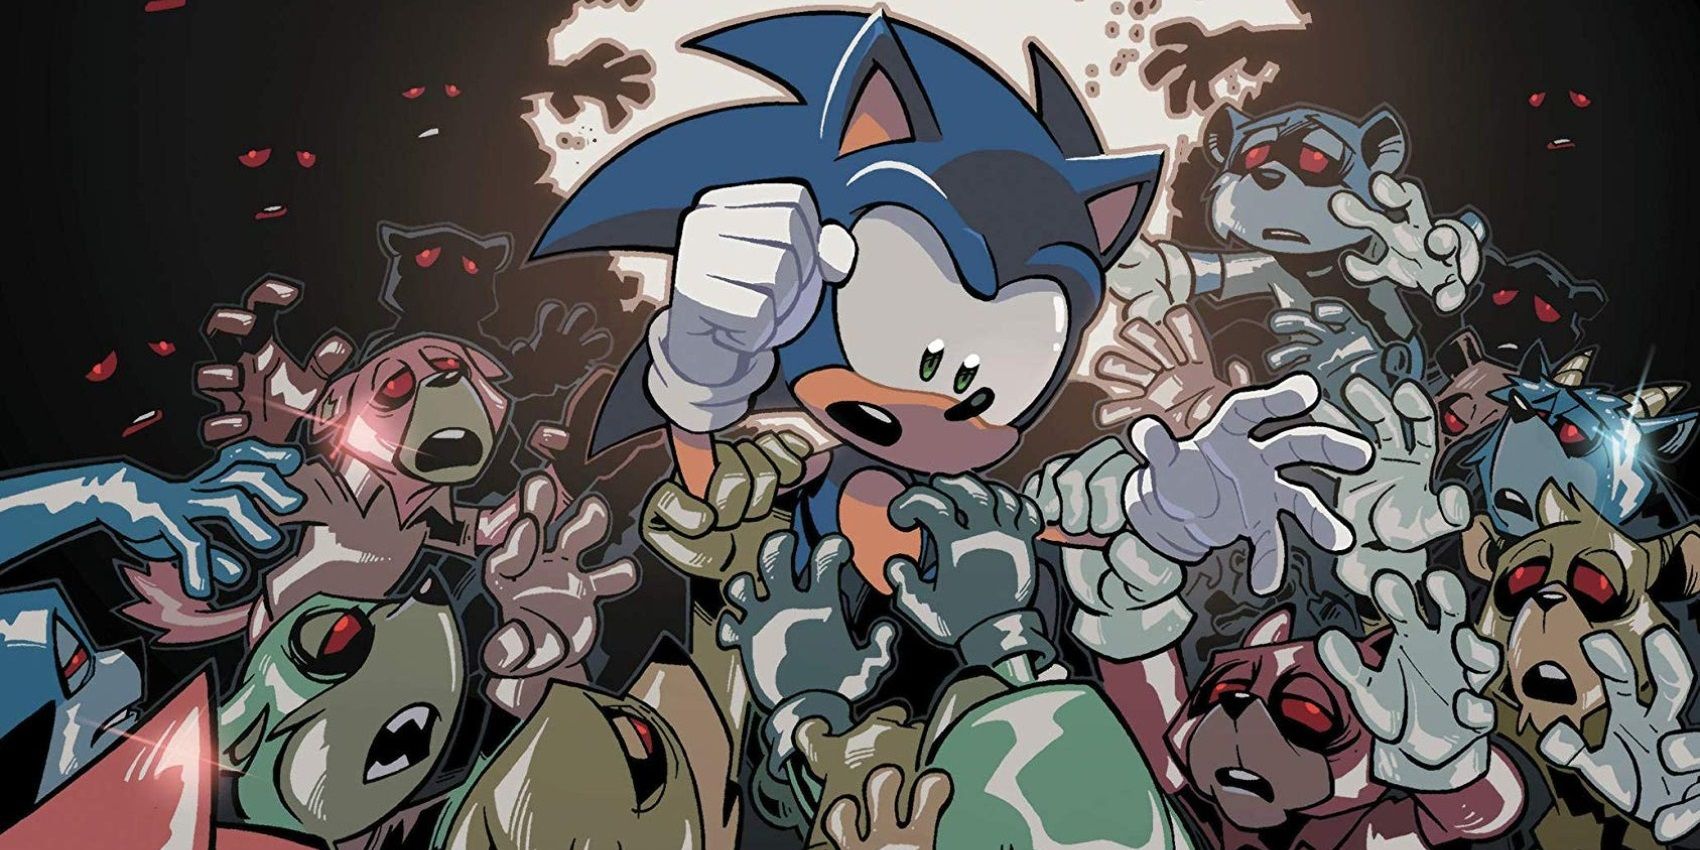 All Future Sonic The Hedgehog Games Need To Learn From The Latest Comics